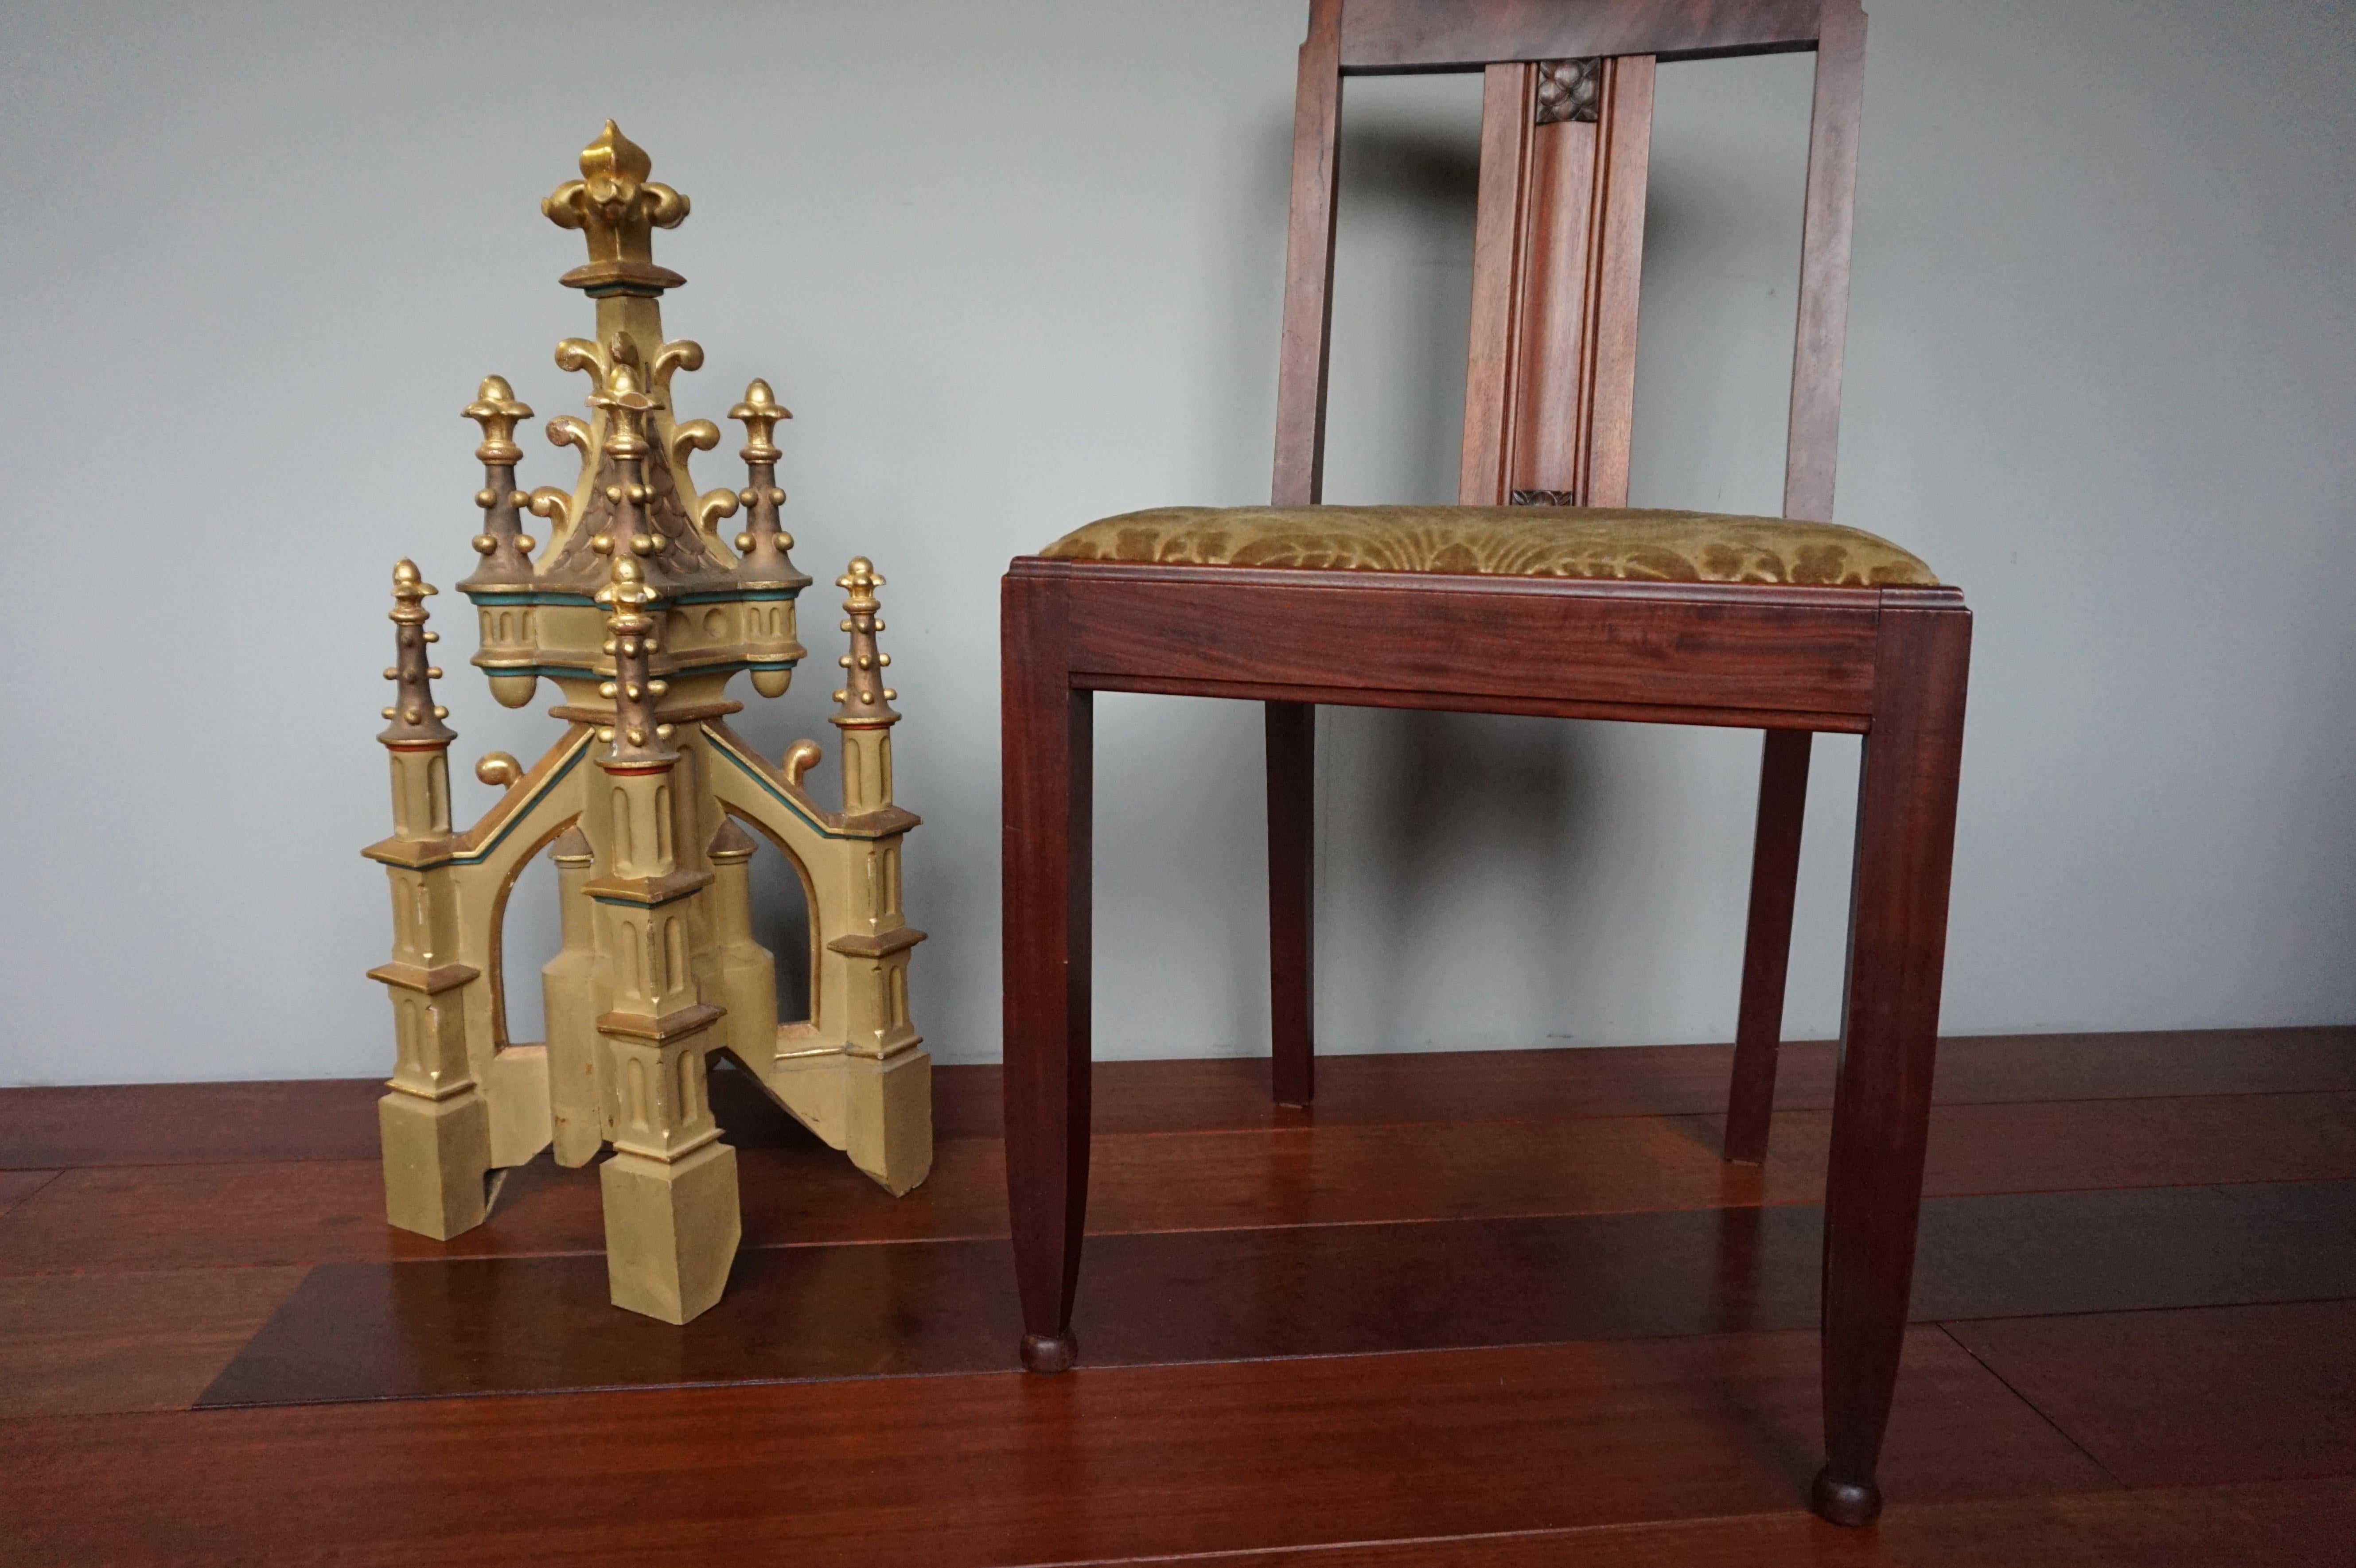 Antique Hand Carved and Hand Painted Wooden Gothic Tower Model with Gilt Finials 2